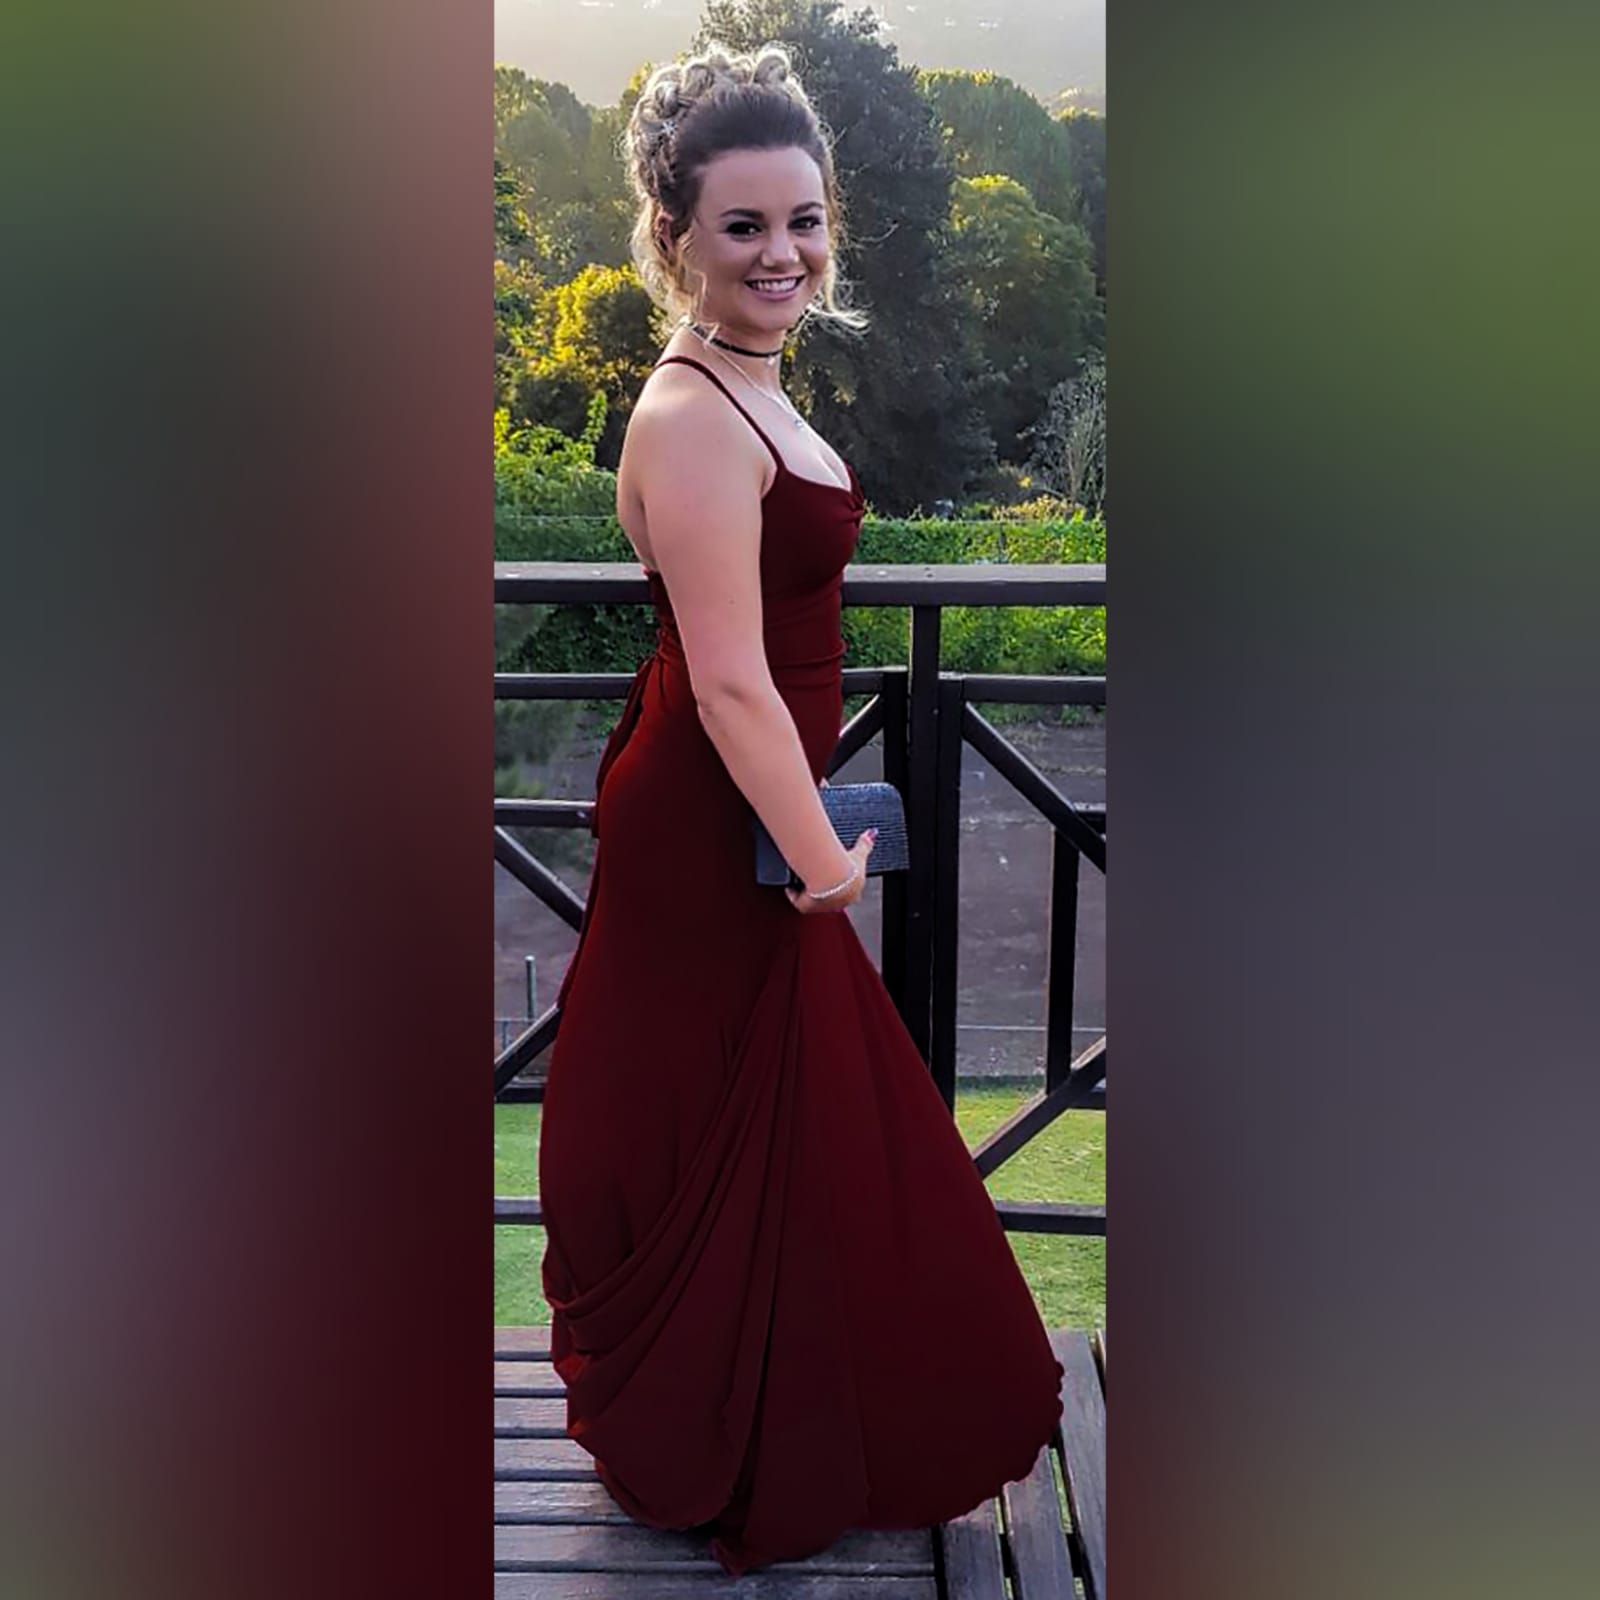 Maroon lace-up back long simple prom dress 7 maroon lace-up back long simple prom dress with thin shoulder straps, high slit and a small train. Lace-up back to adjust the fit.